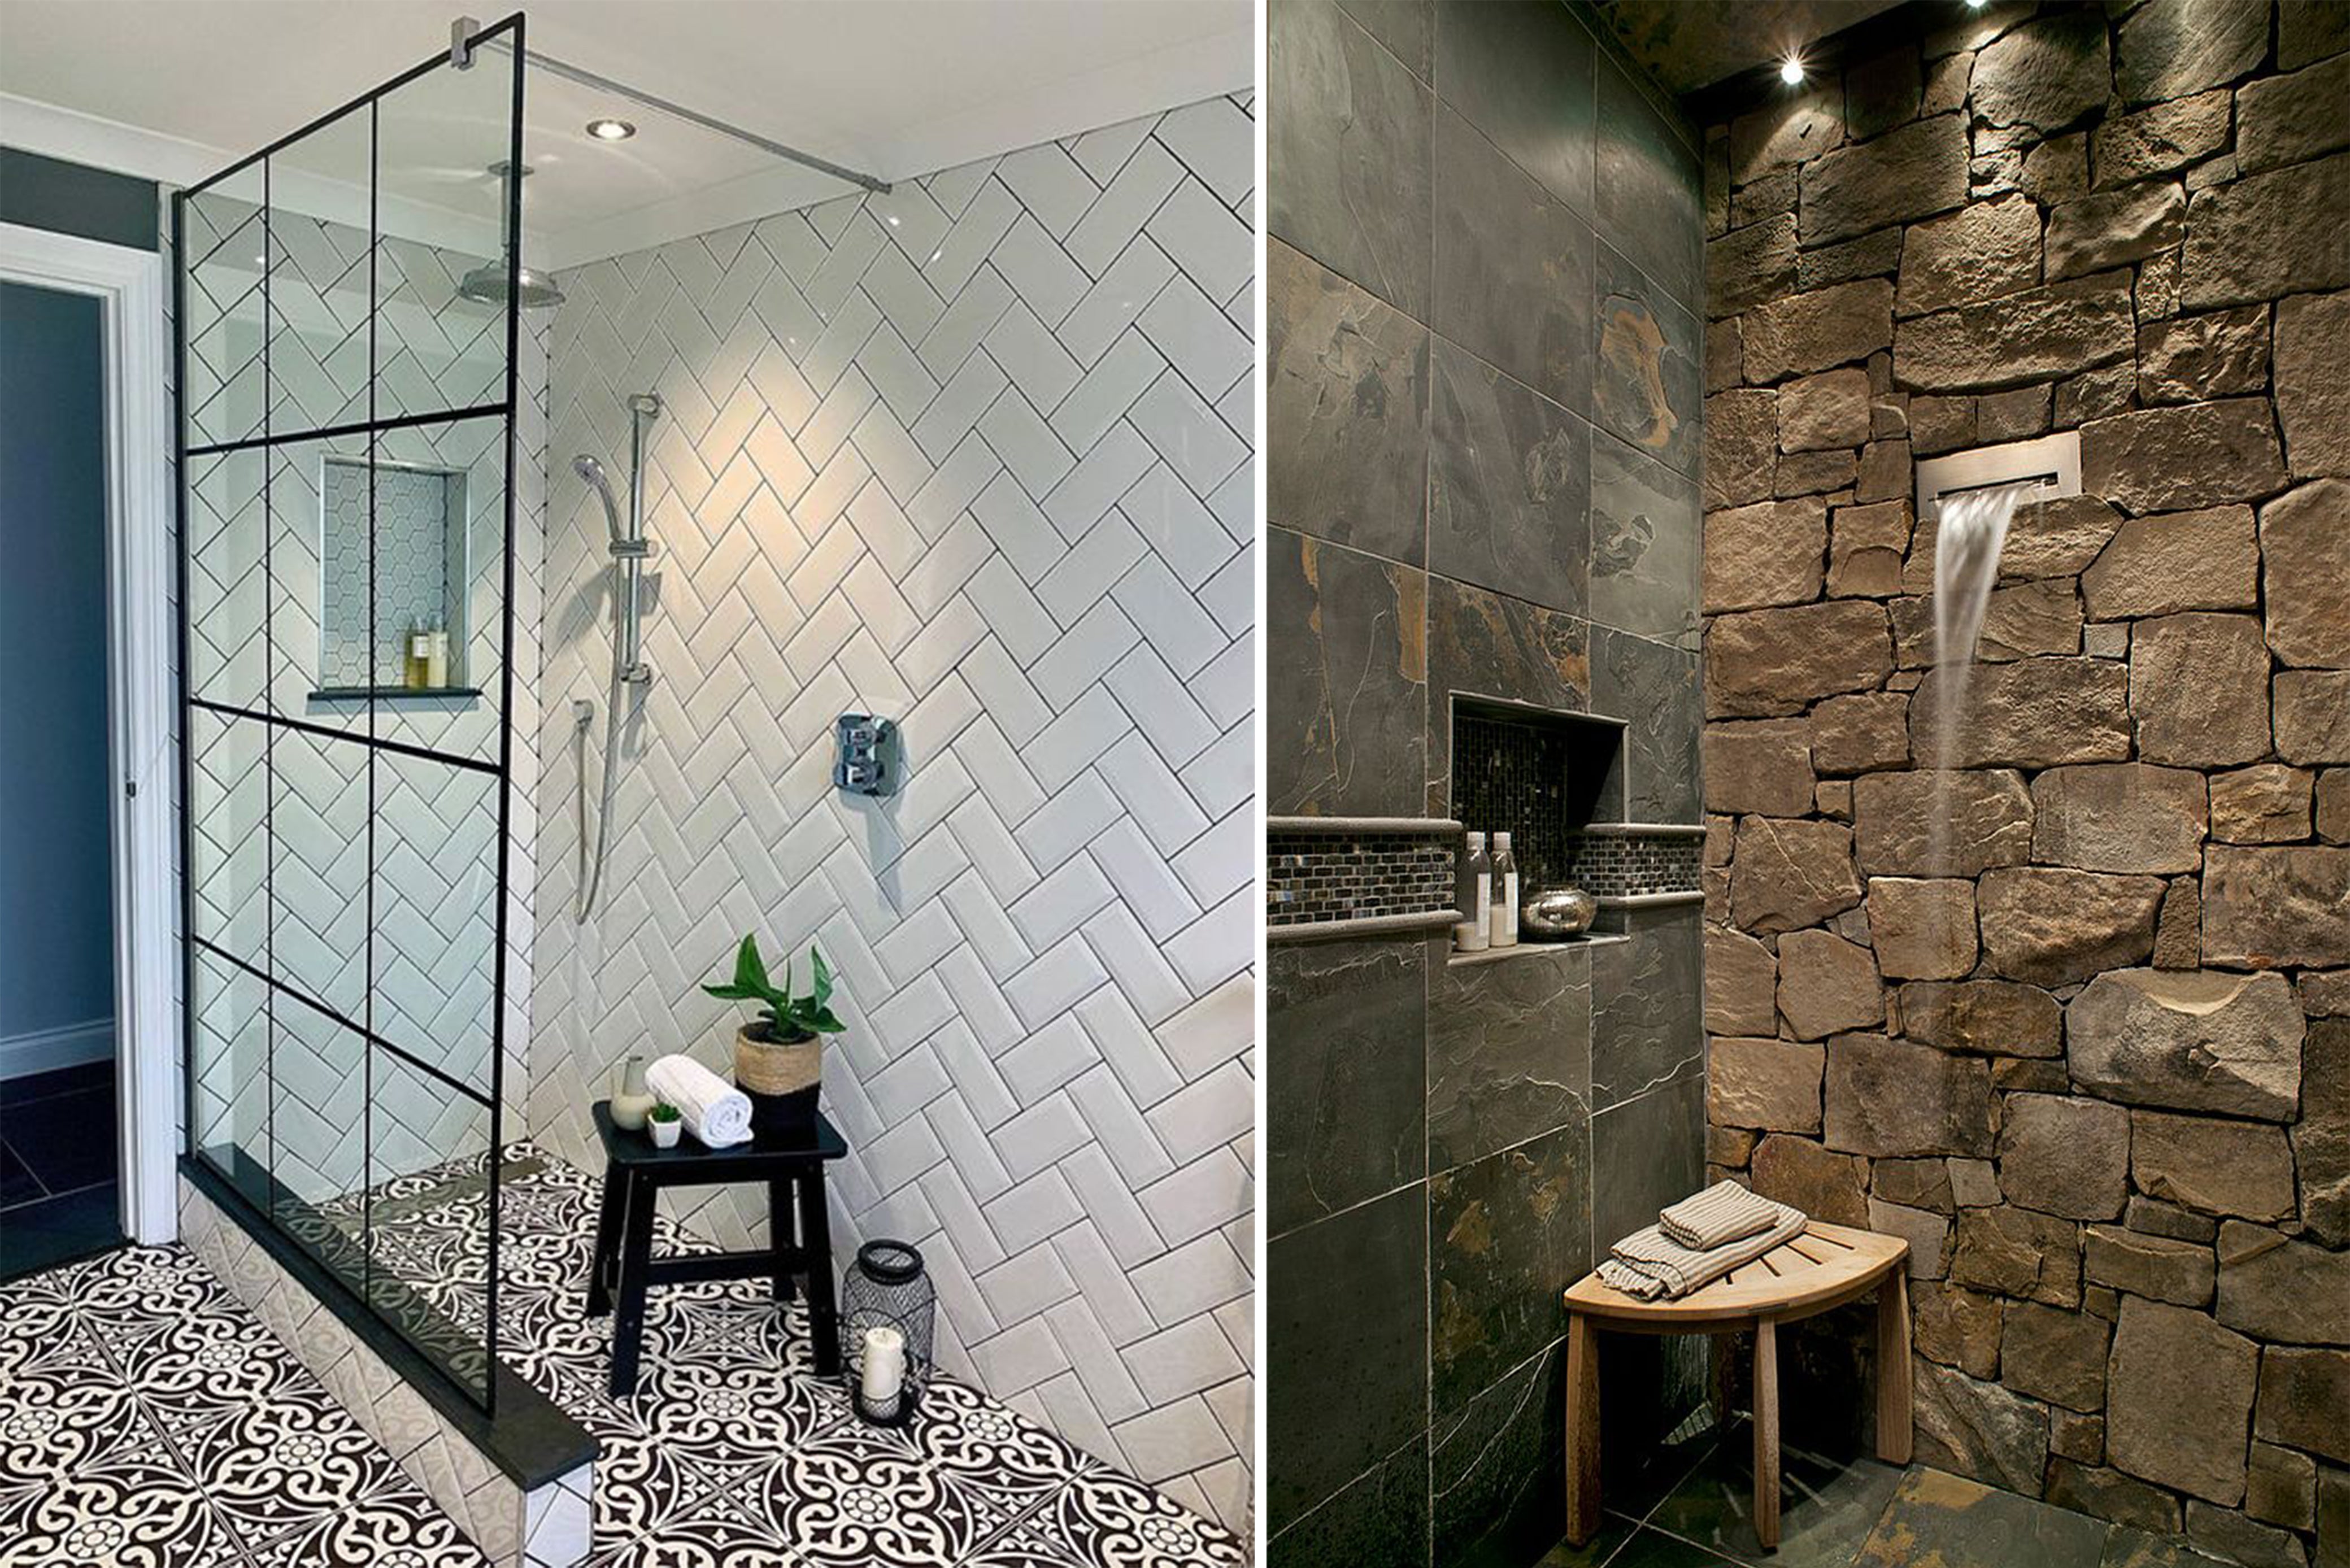 Which Are The Best Bathroom Wall Options For Your Remodel?